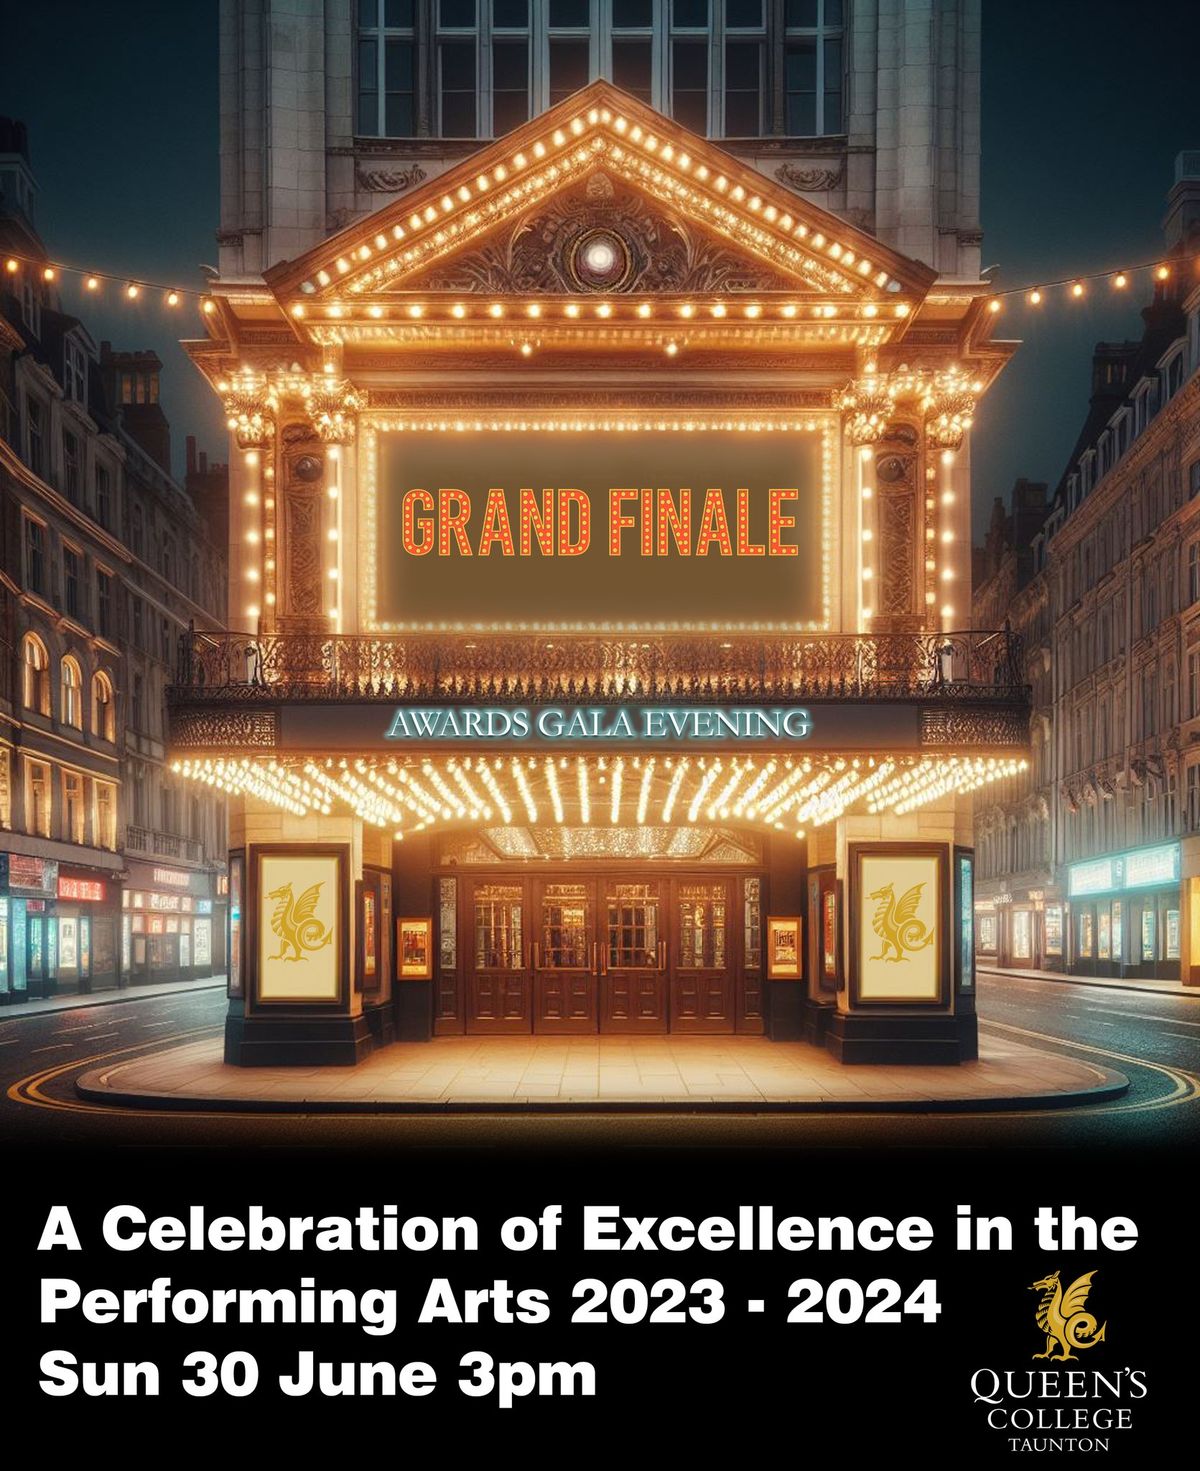 The Grand Finale Awards Gala